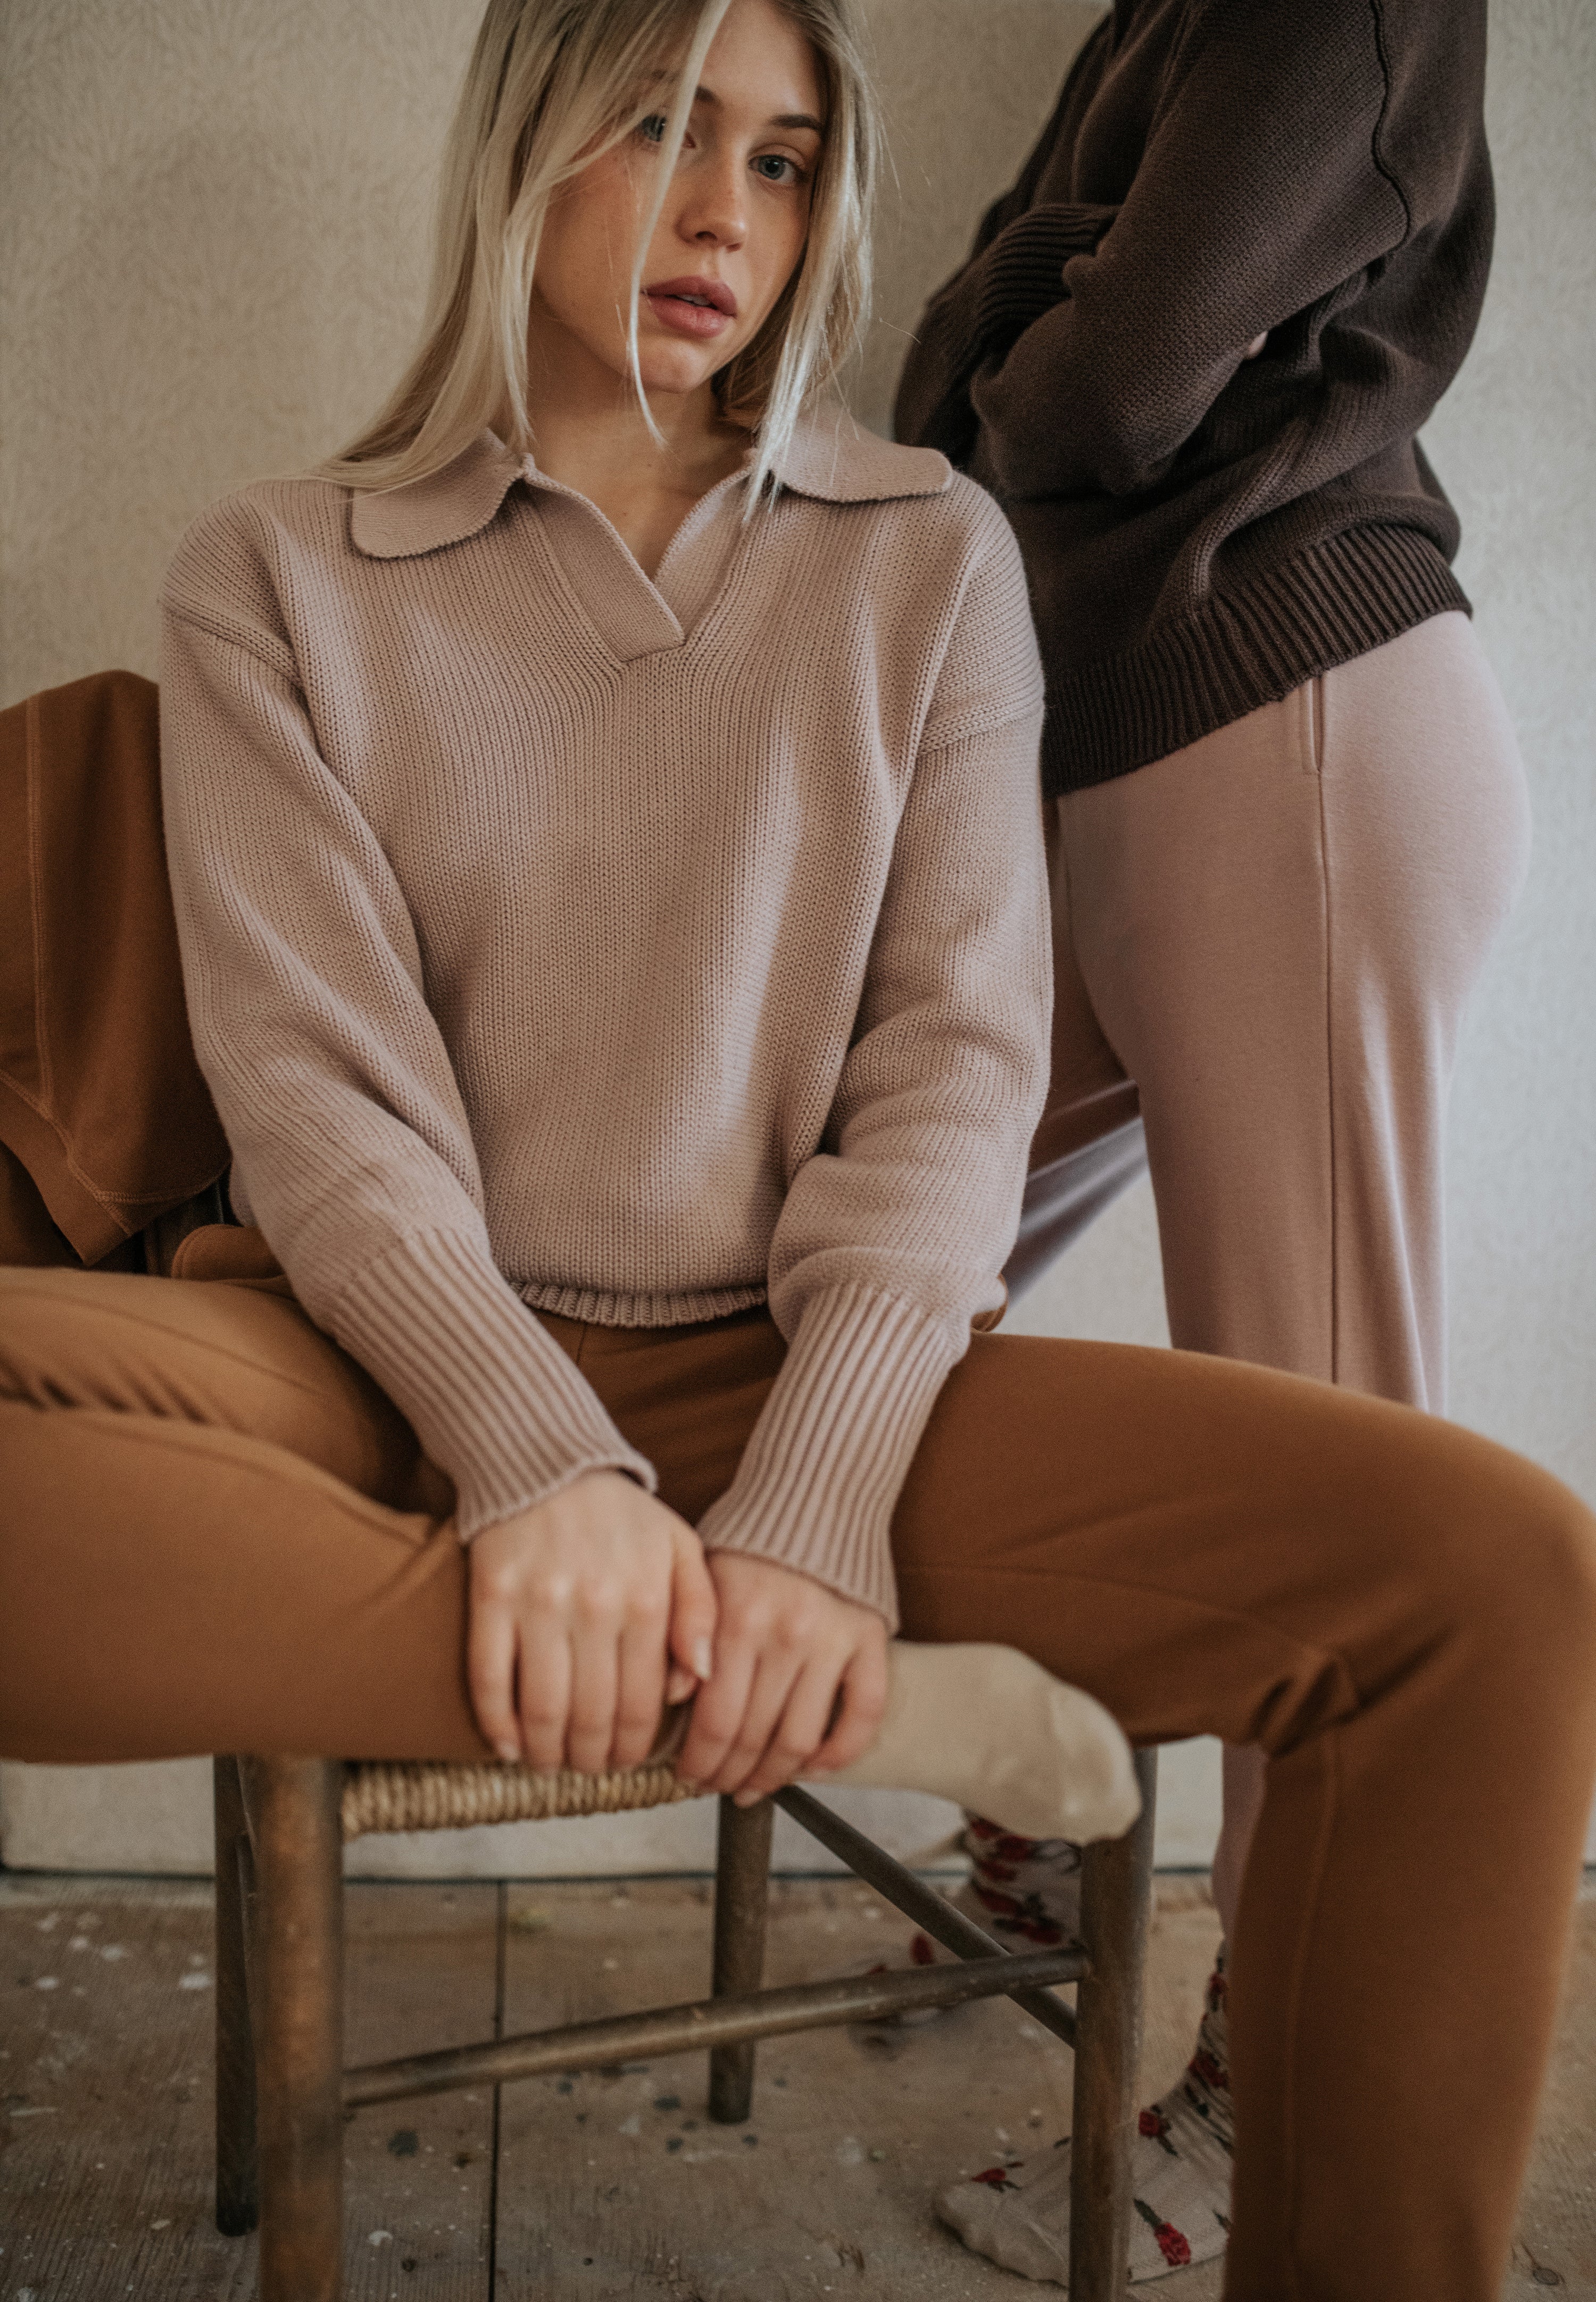 one woman sits on a chair in knit lounge pants and a knit collared sweater.  Another women stands behind in coordinating colours of the same outfit. 